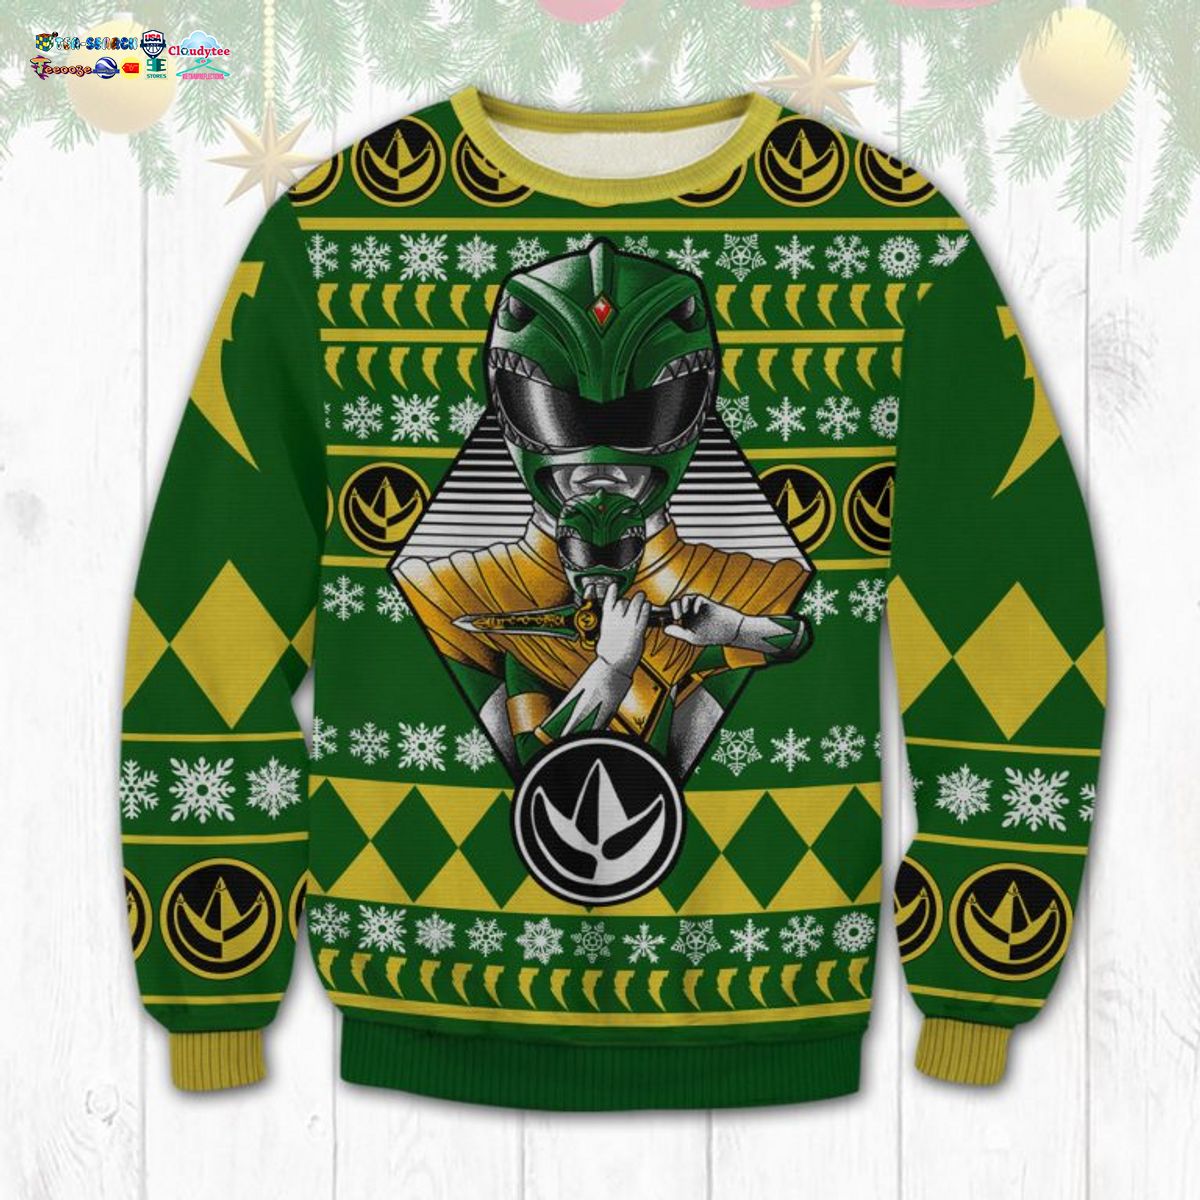 Green Power Rangers Ugly Christmas Sweater - You look lazy